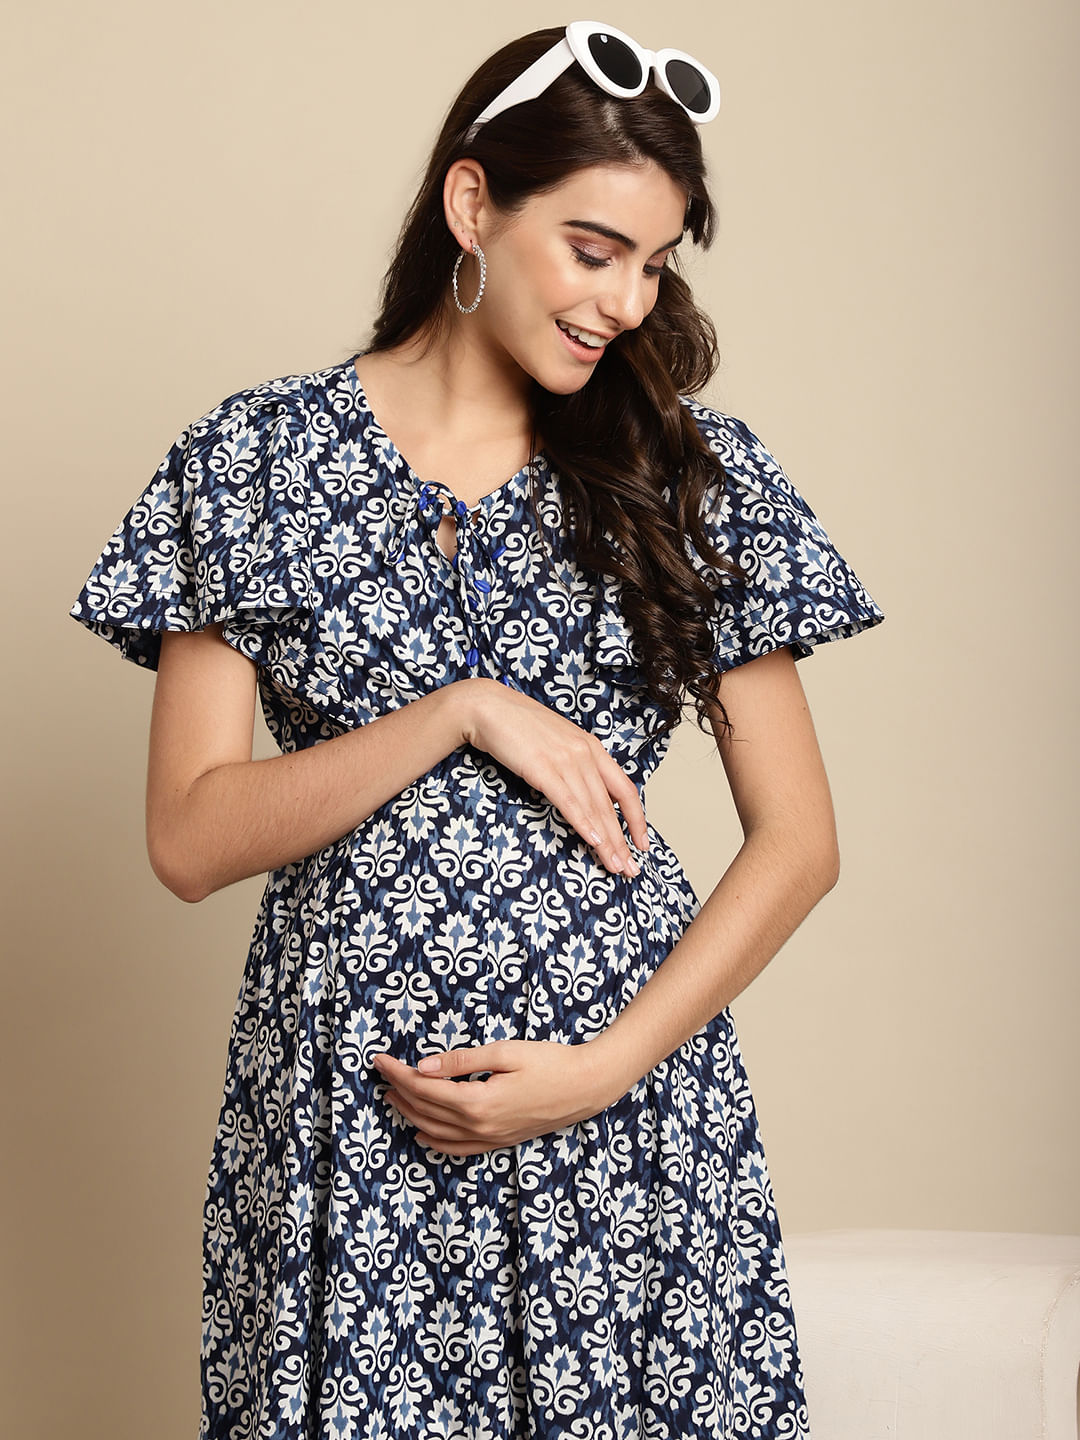 Buy Navy Blue Cotton Printed Maternity Dress for Women Online at